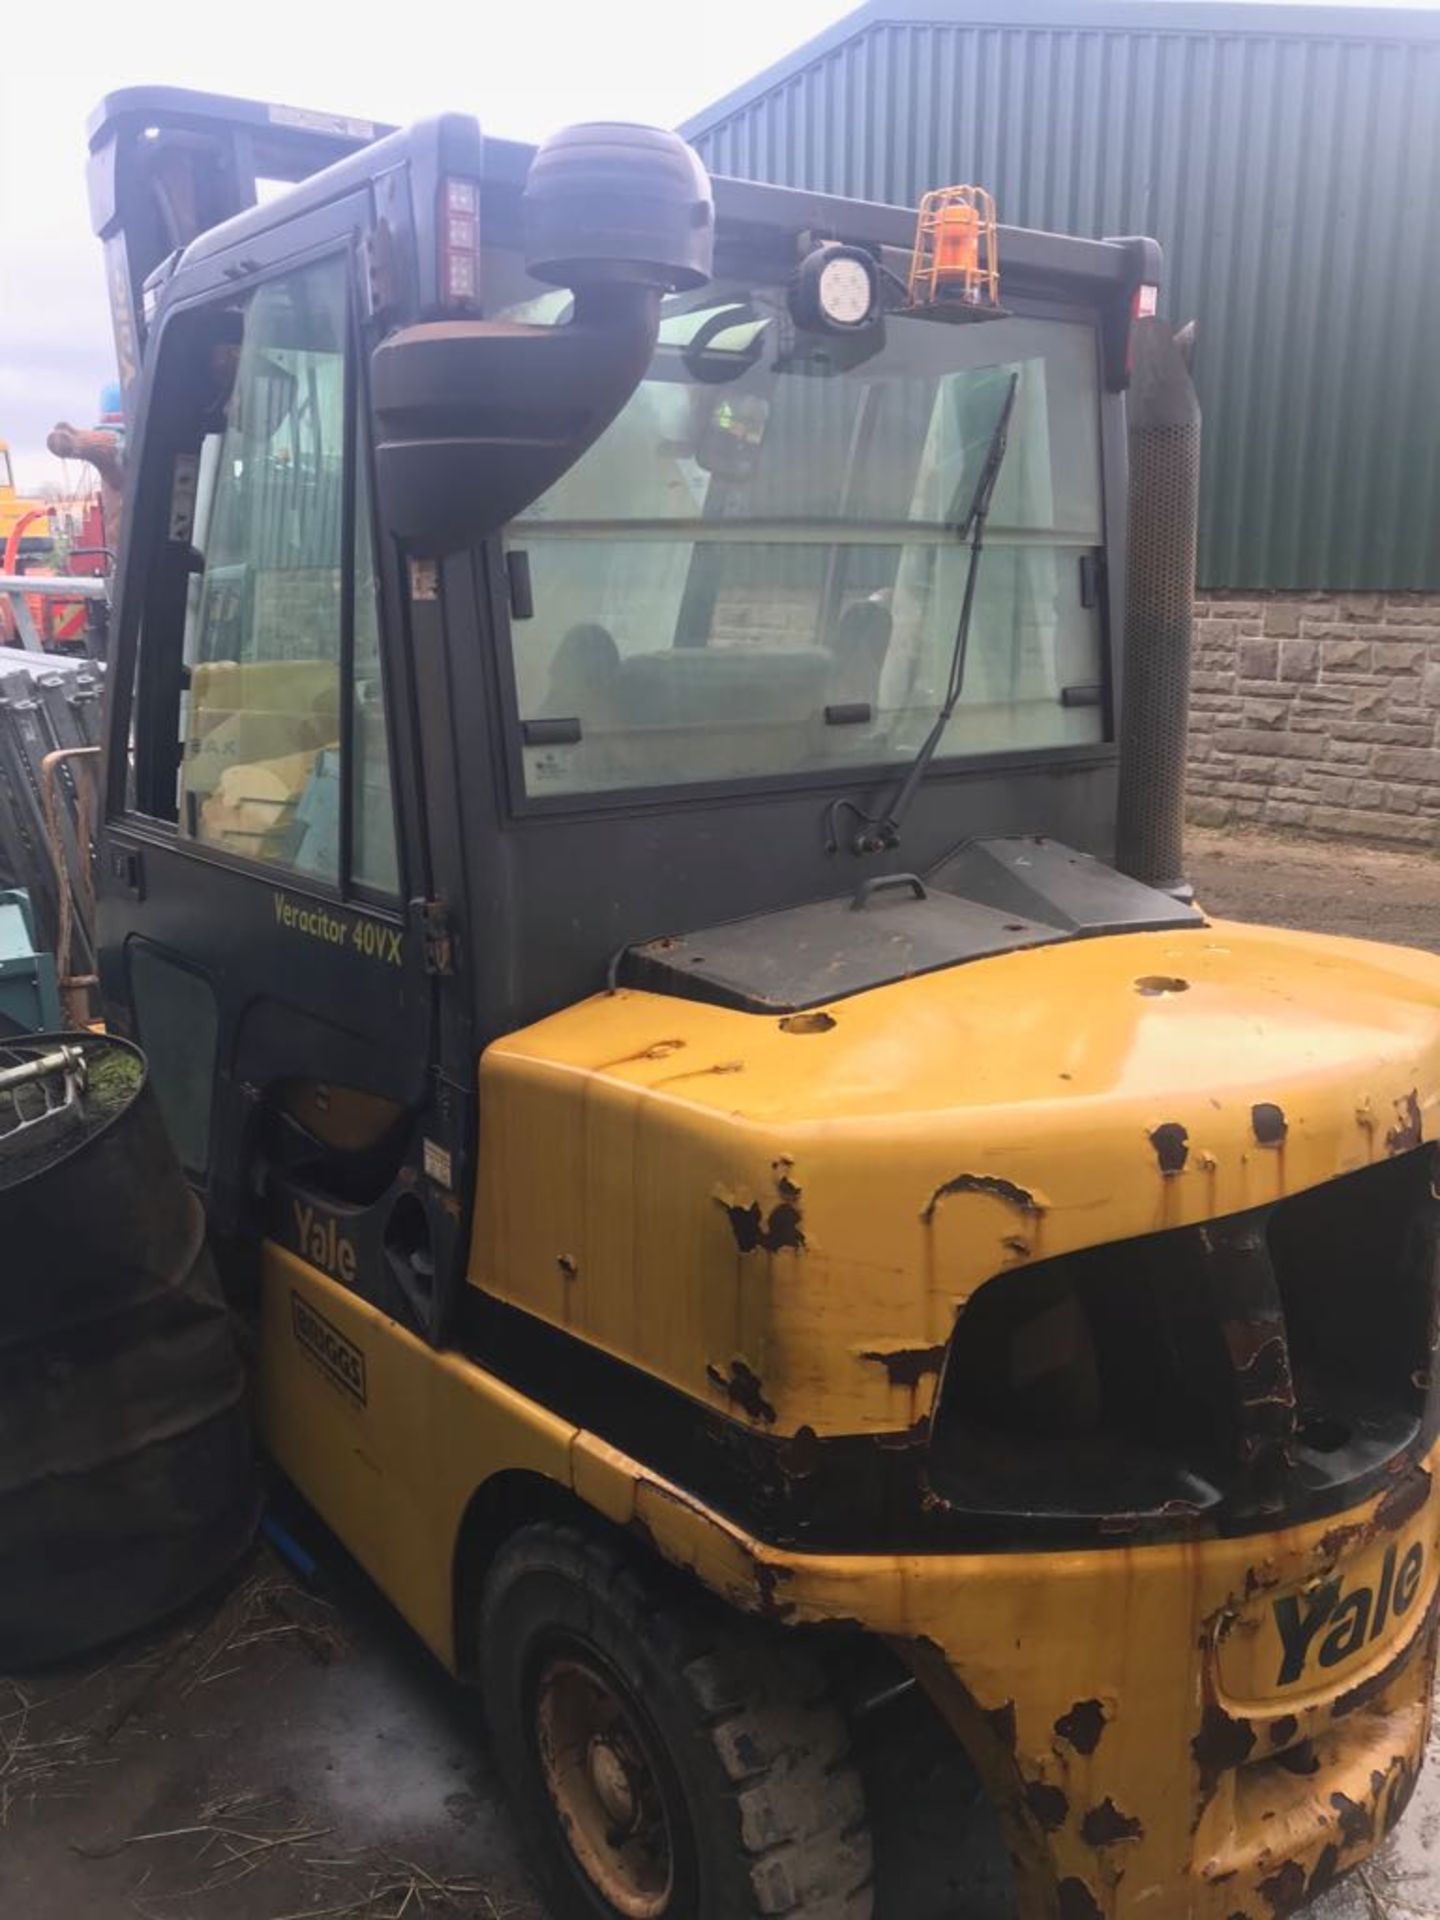 2012 YALE VERACITOR 40 VX FORKLIFT, STARTS BUT BRAKES ARE STUCK ON *PLUS VAT* - Image 2 of 6